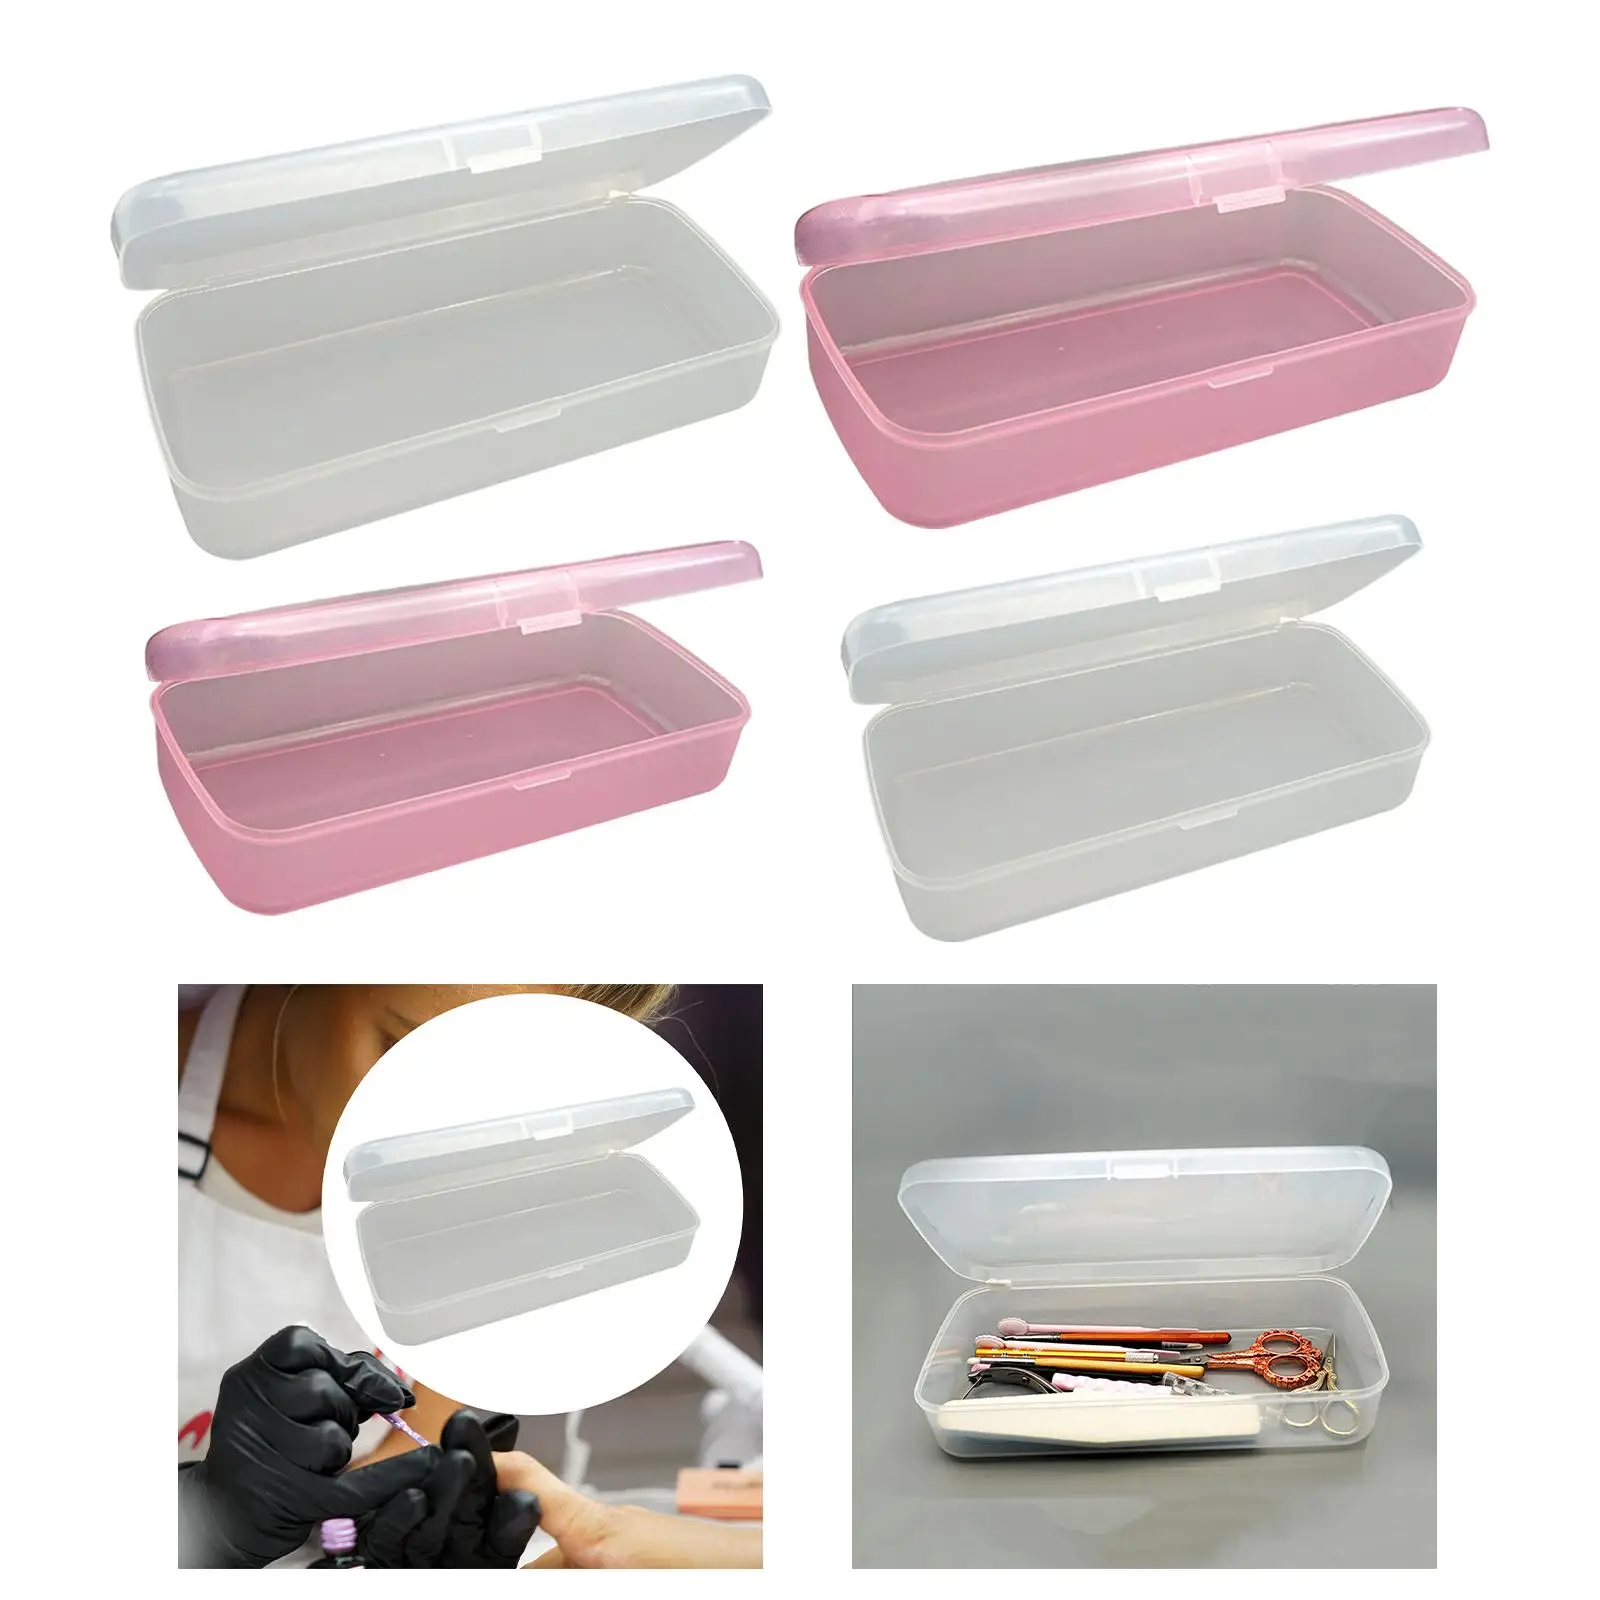 Nail Art Tool Storage Box Organizing Clear Personal Empty Container Manicure Tool Box Organizer for Beads Polishing Strip